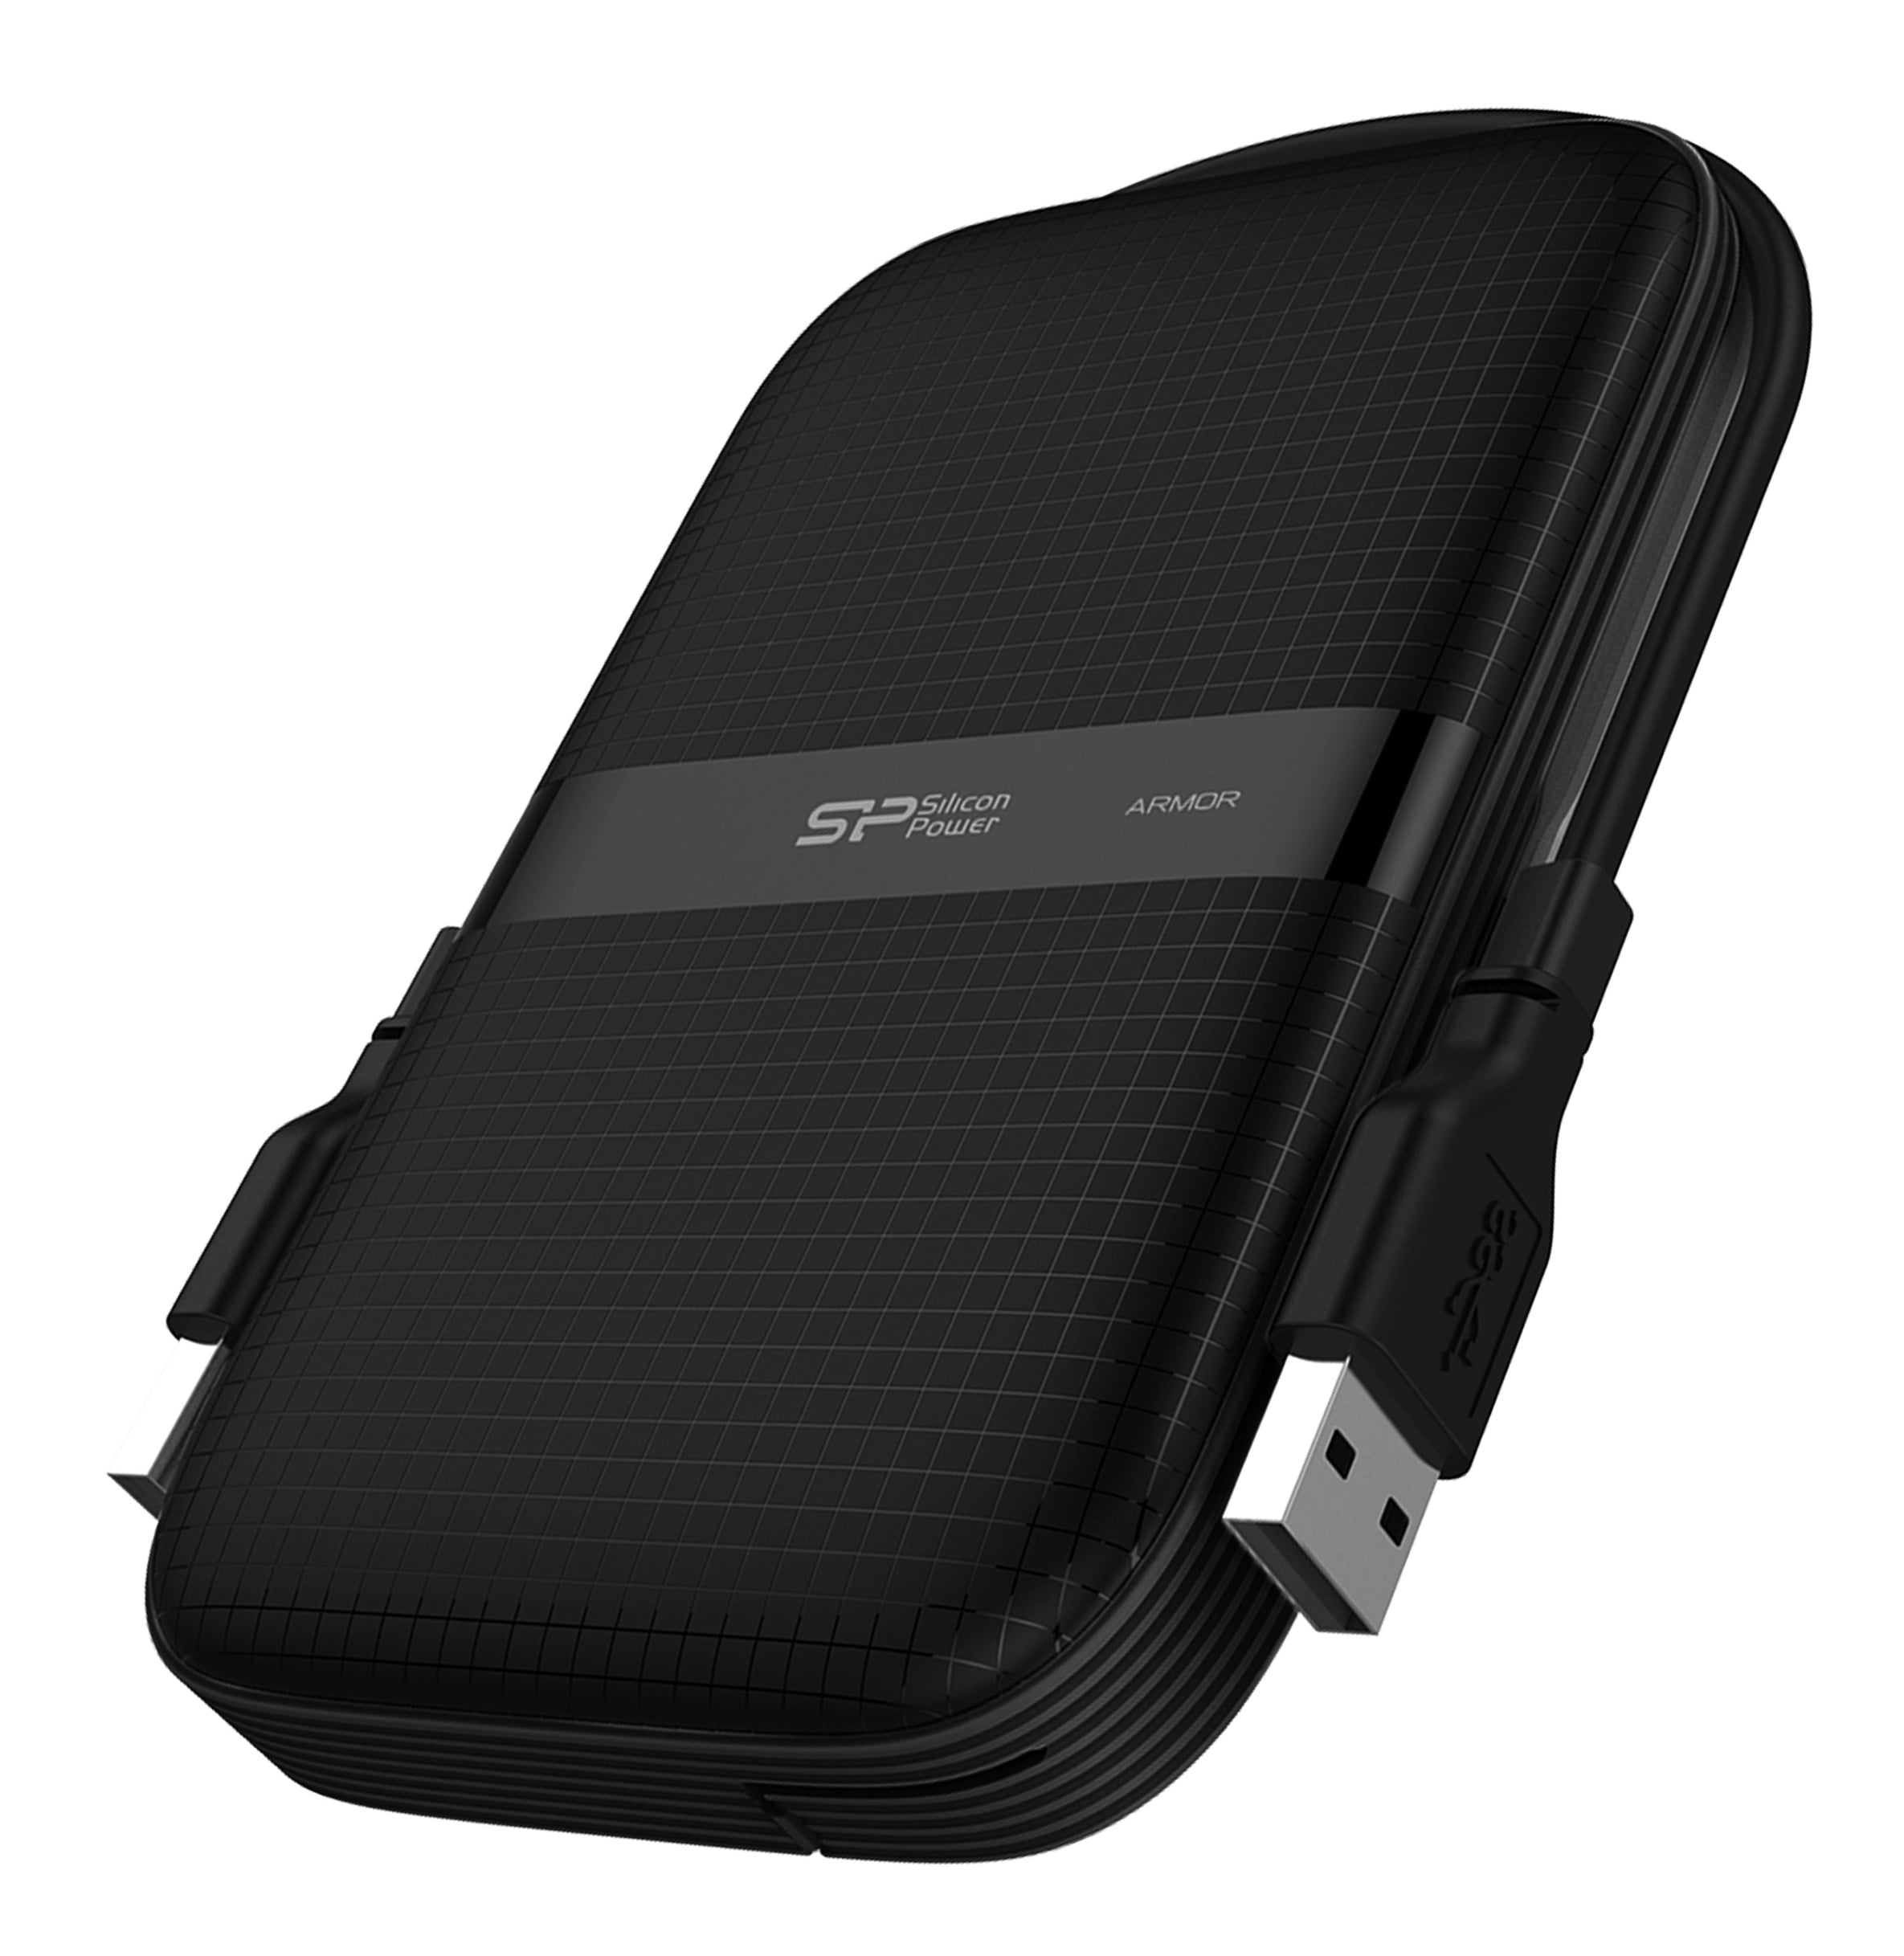 5TB Silicon Power Armor A60 Shockproof Portable Hard Drive 